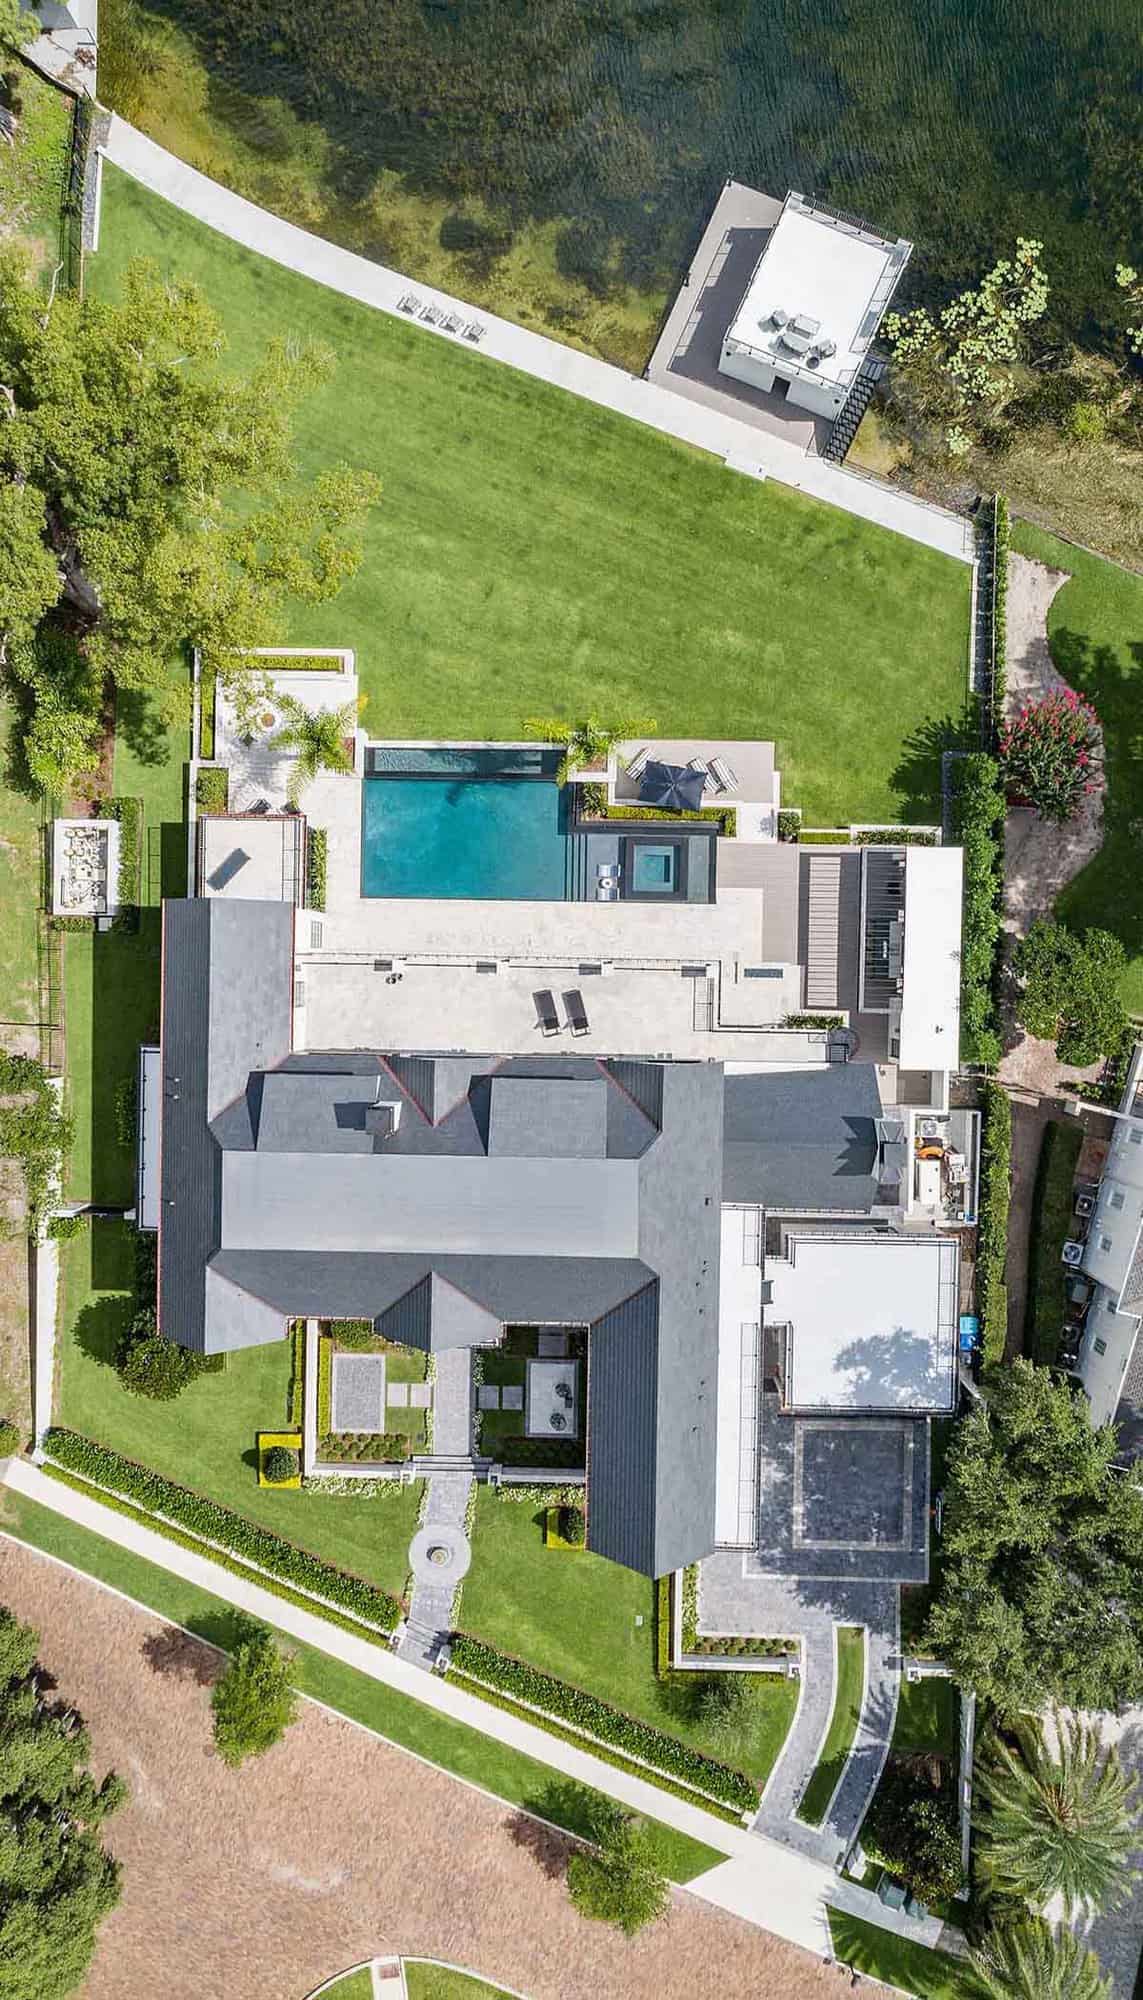 transitional style lake house aerial view